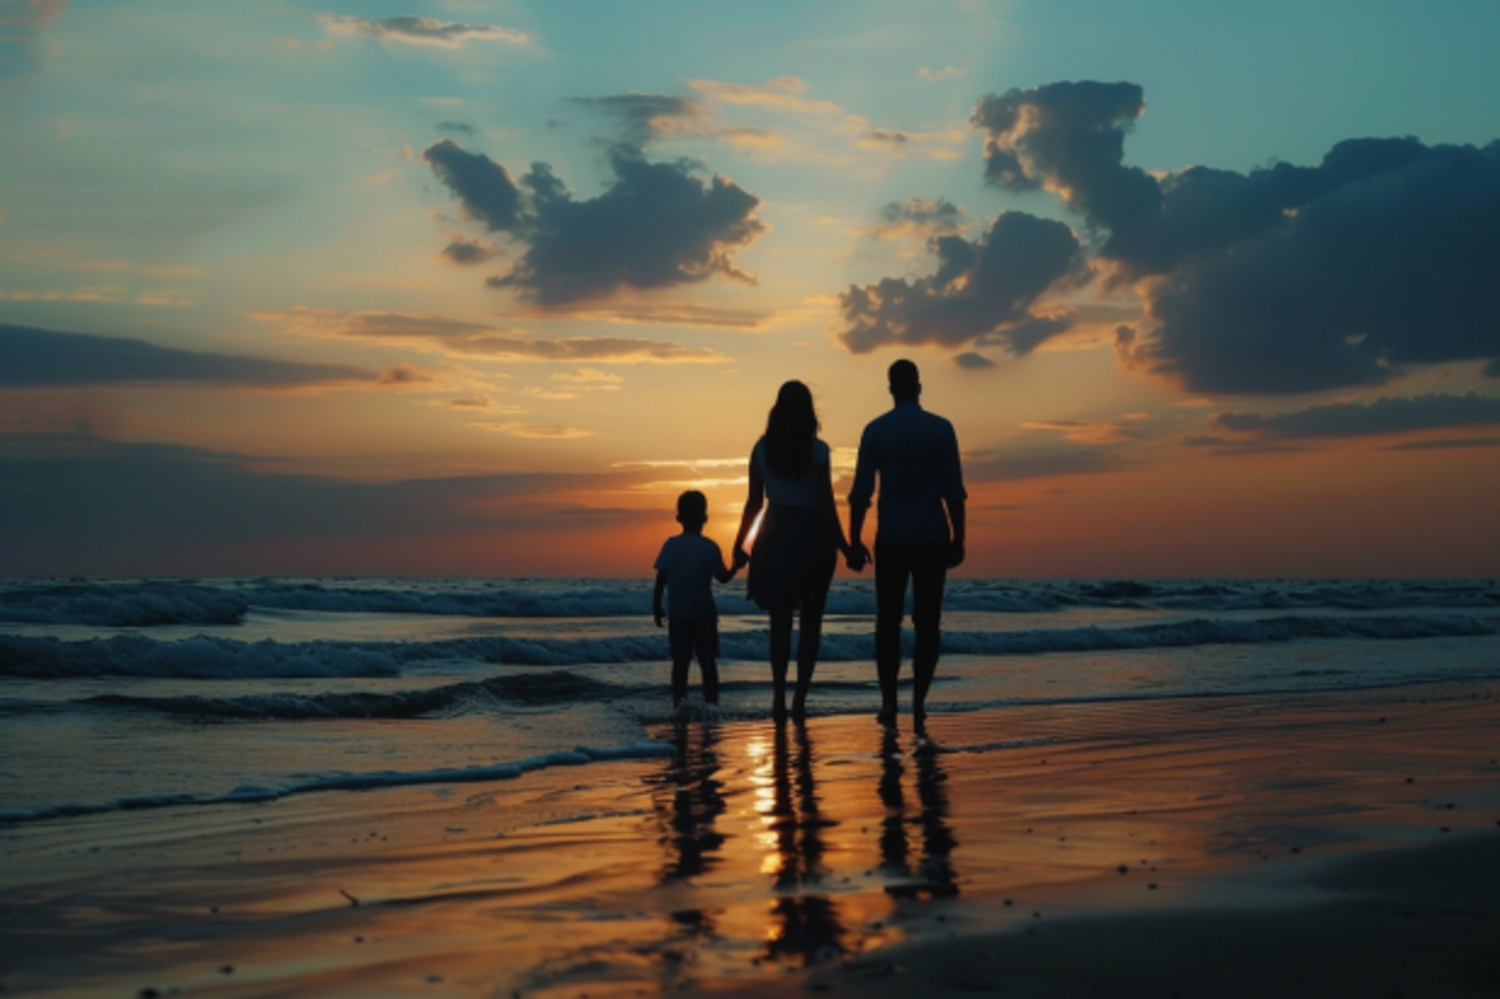 Silhouette of a happy and peaceful family at the beach | Source: Midjourney